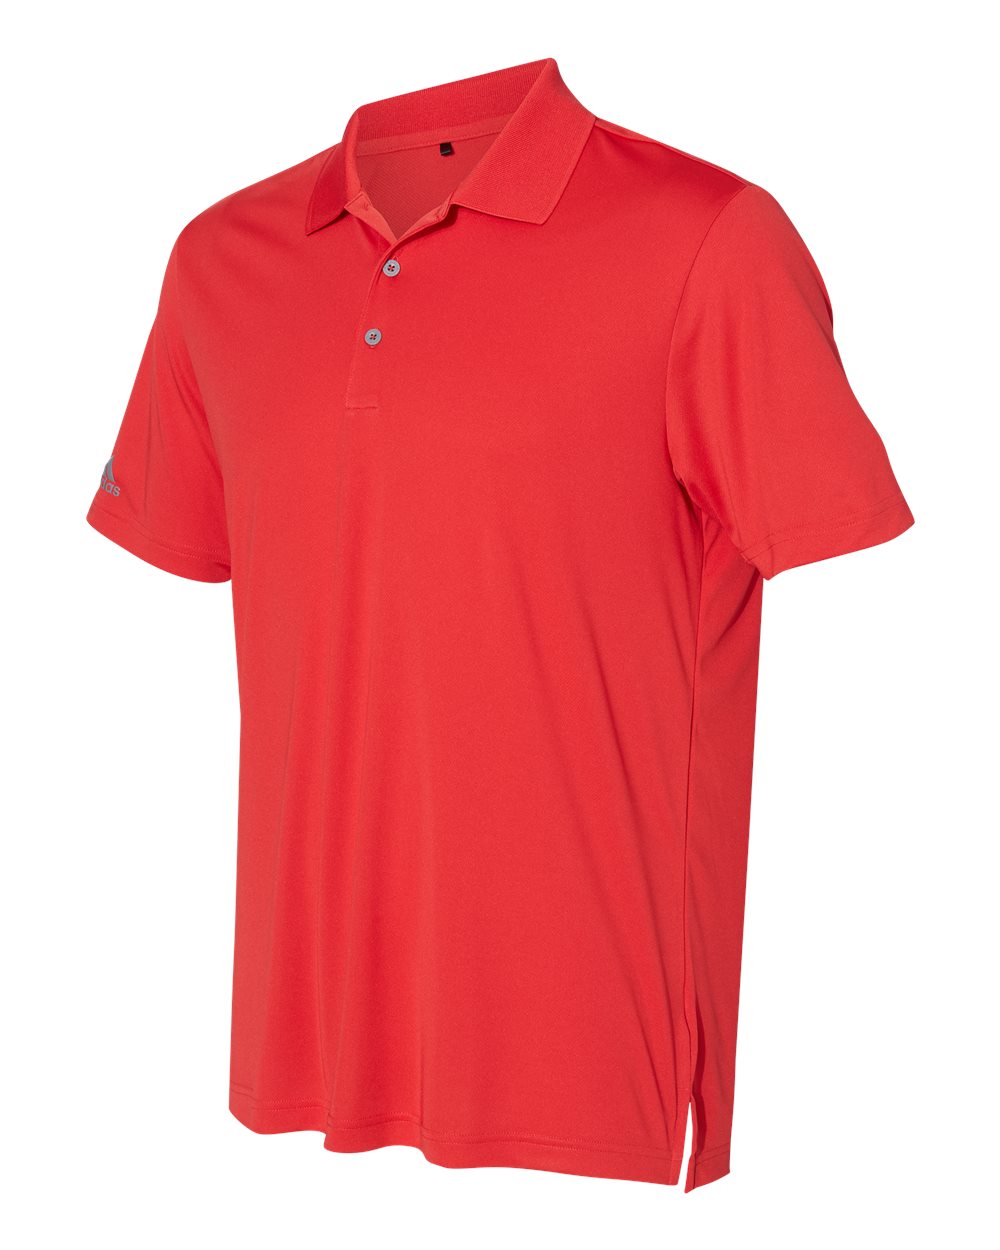 click to view Collegiate Red